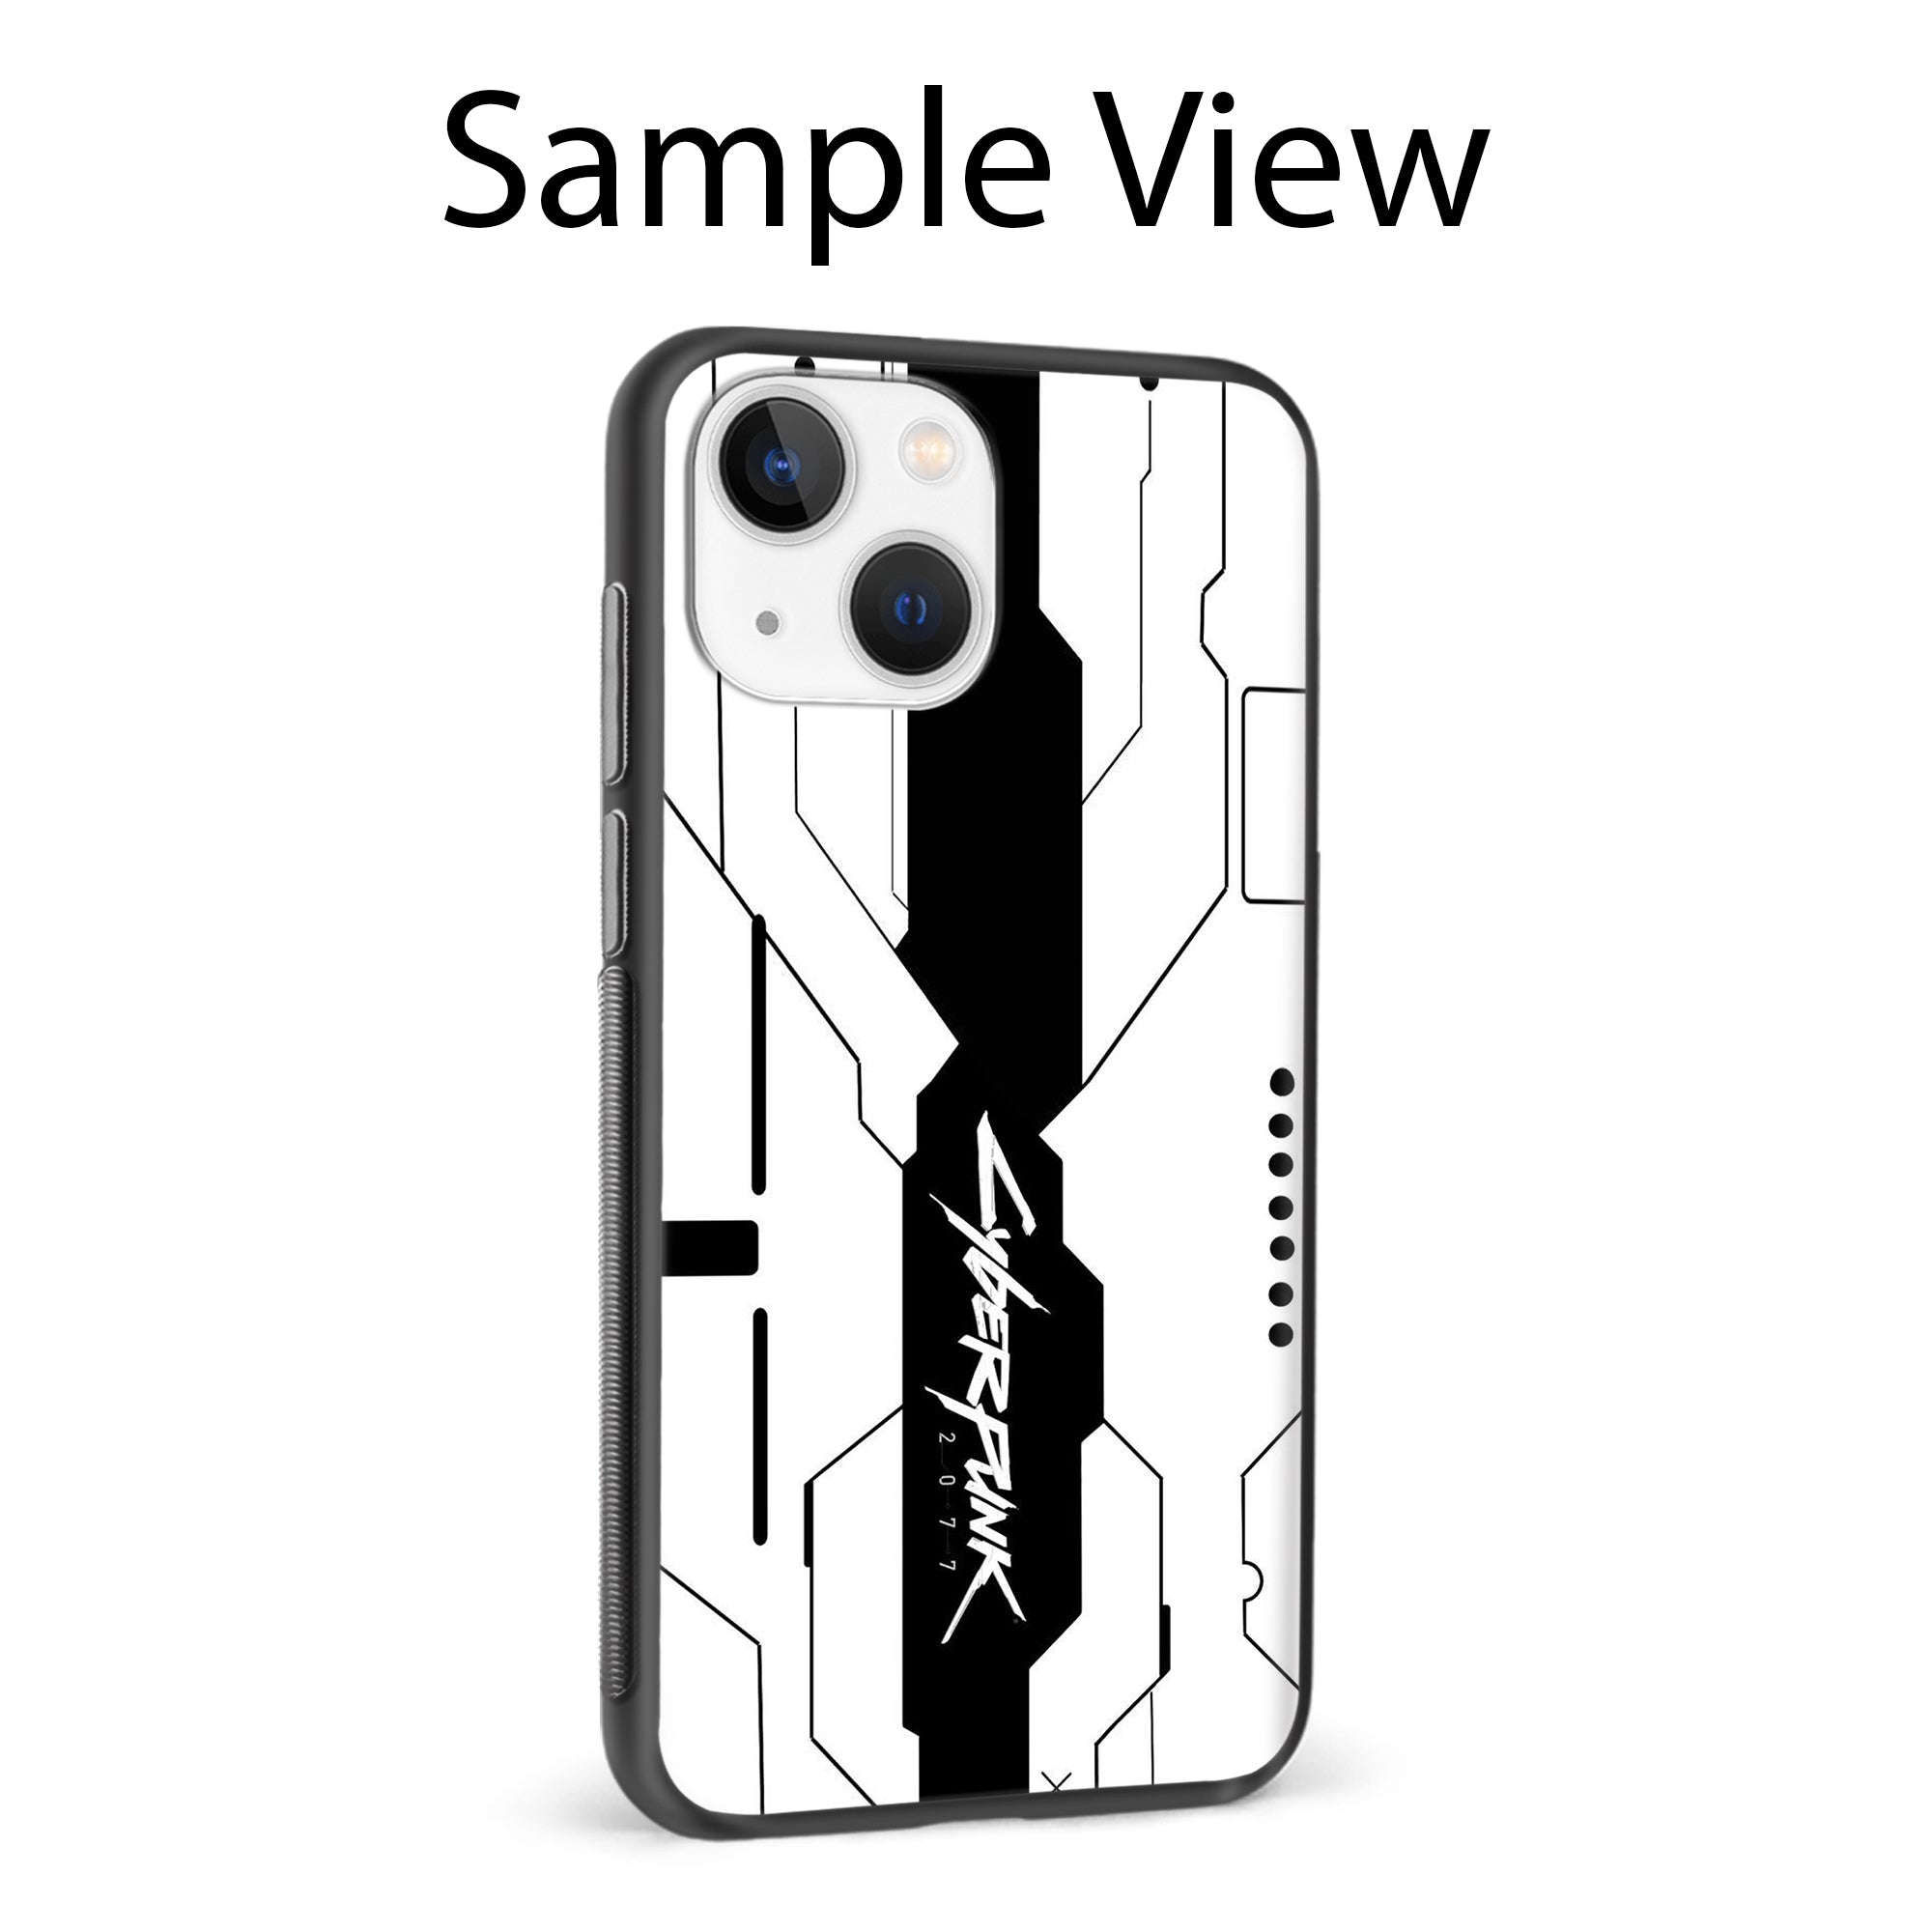 Buy Cyberpunk 2077 Glass/Metal Back Mobile Phone Case/Cover For iPhone 11 Pro Online